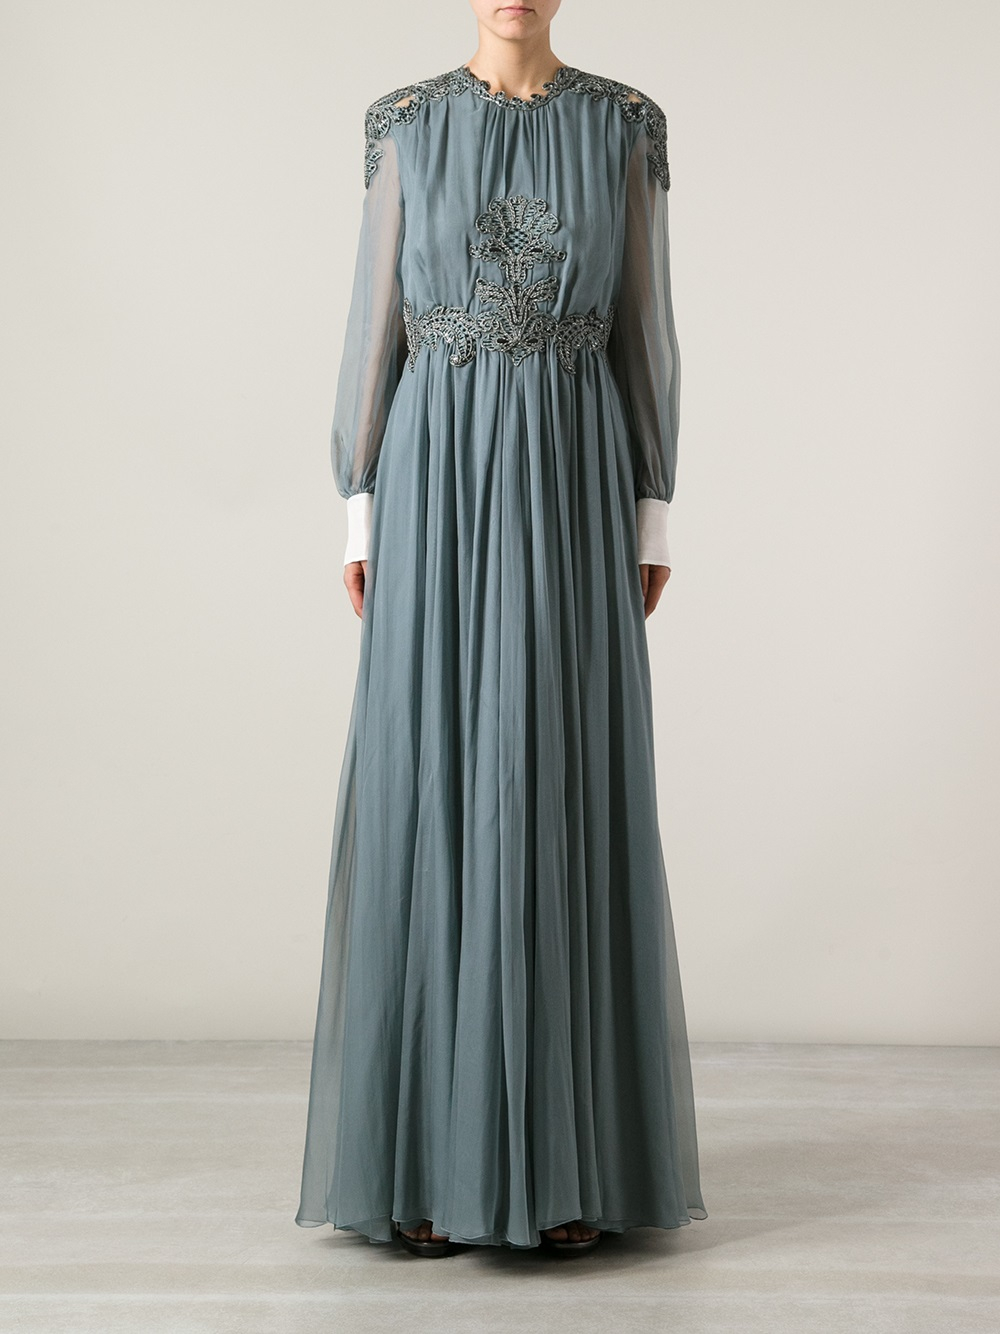 Lyst - Valentino Embellished Maxi Dress in Gray